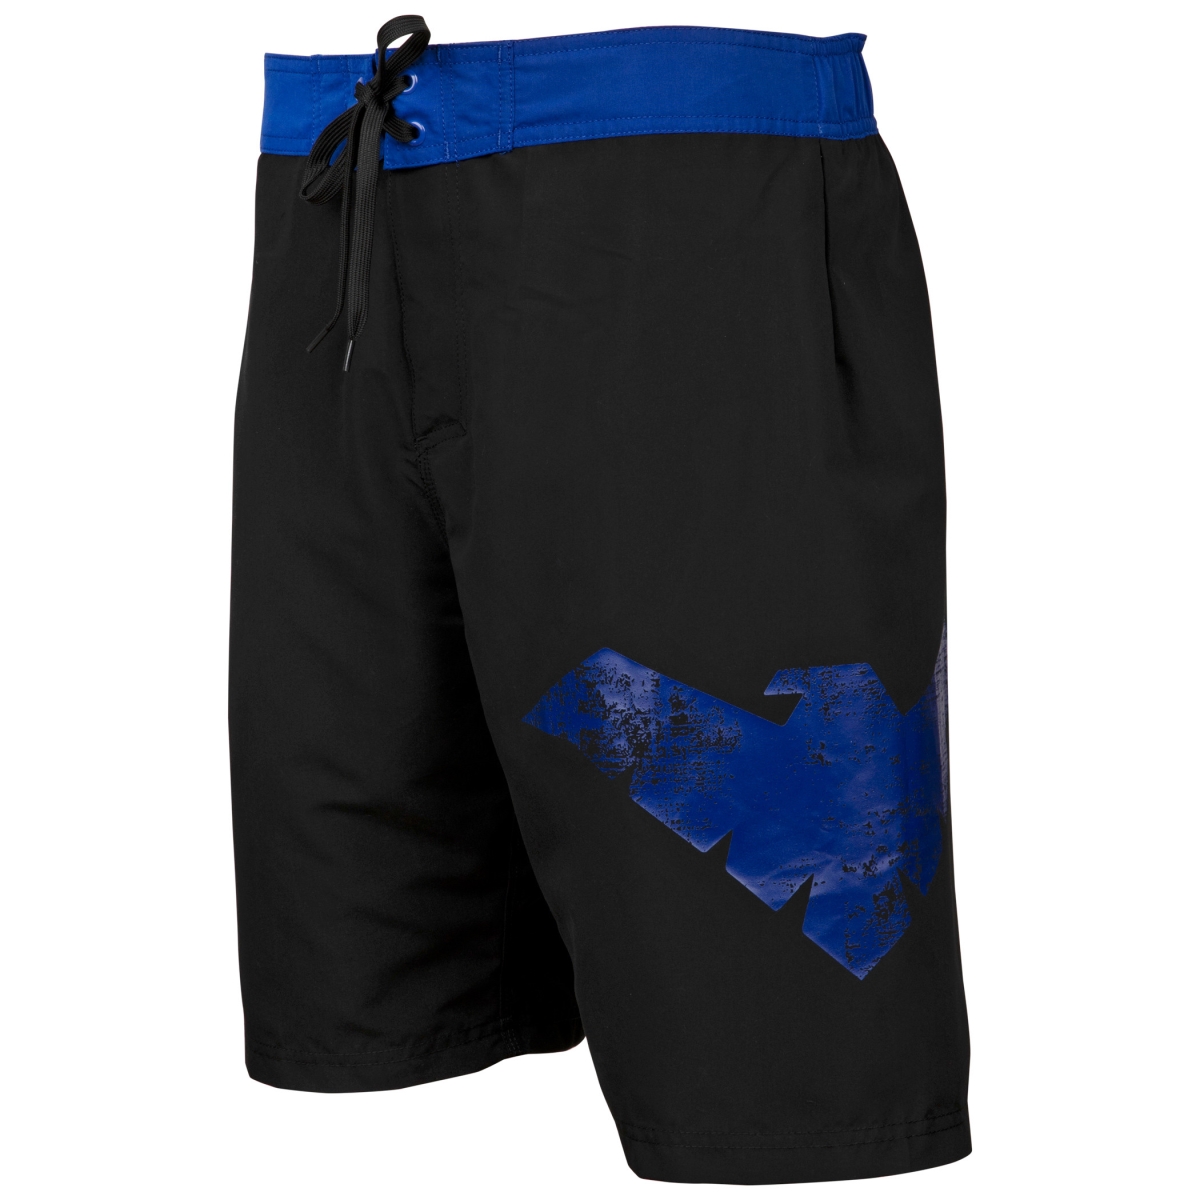 Picture of Nightwing 803533-large 36-38 Nightwing Symbol Board Shorts, Heather Black - Large 36-38